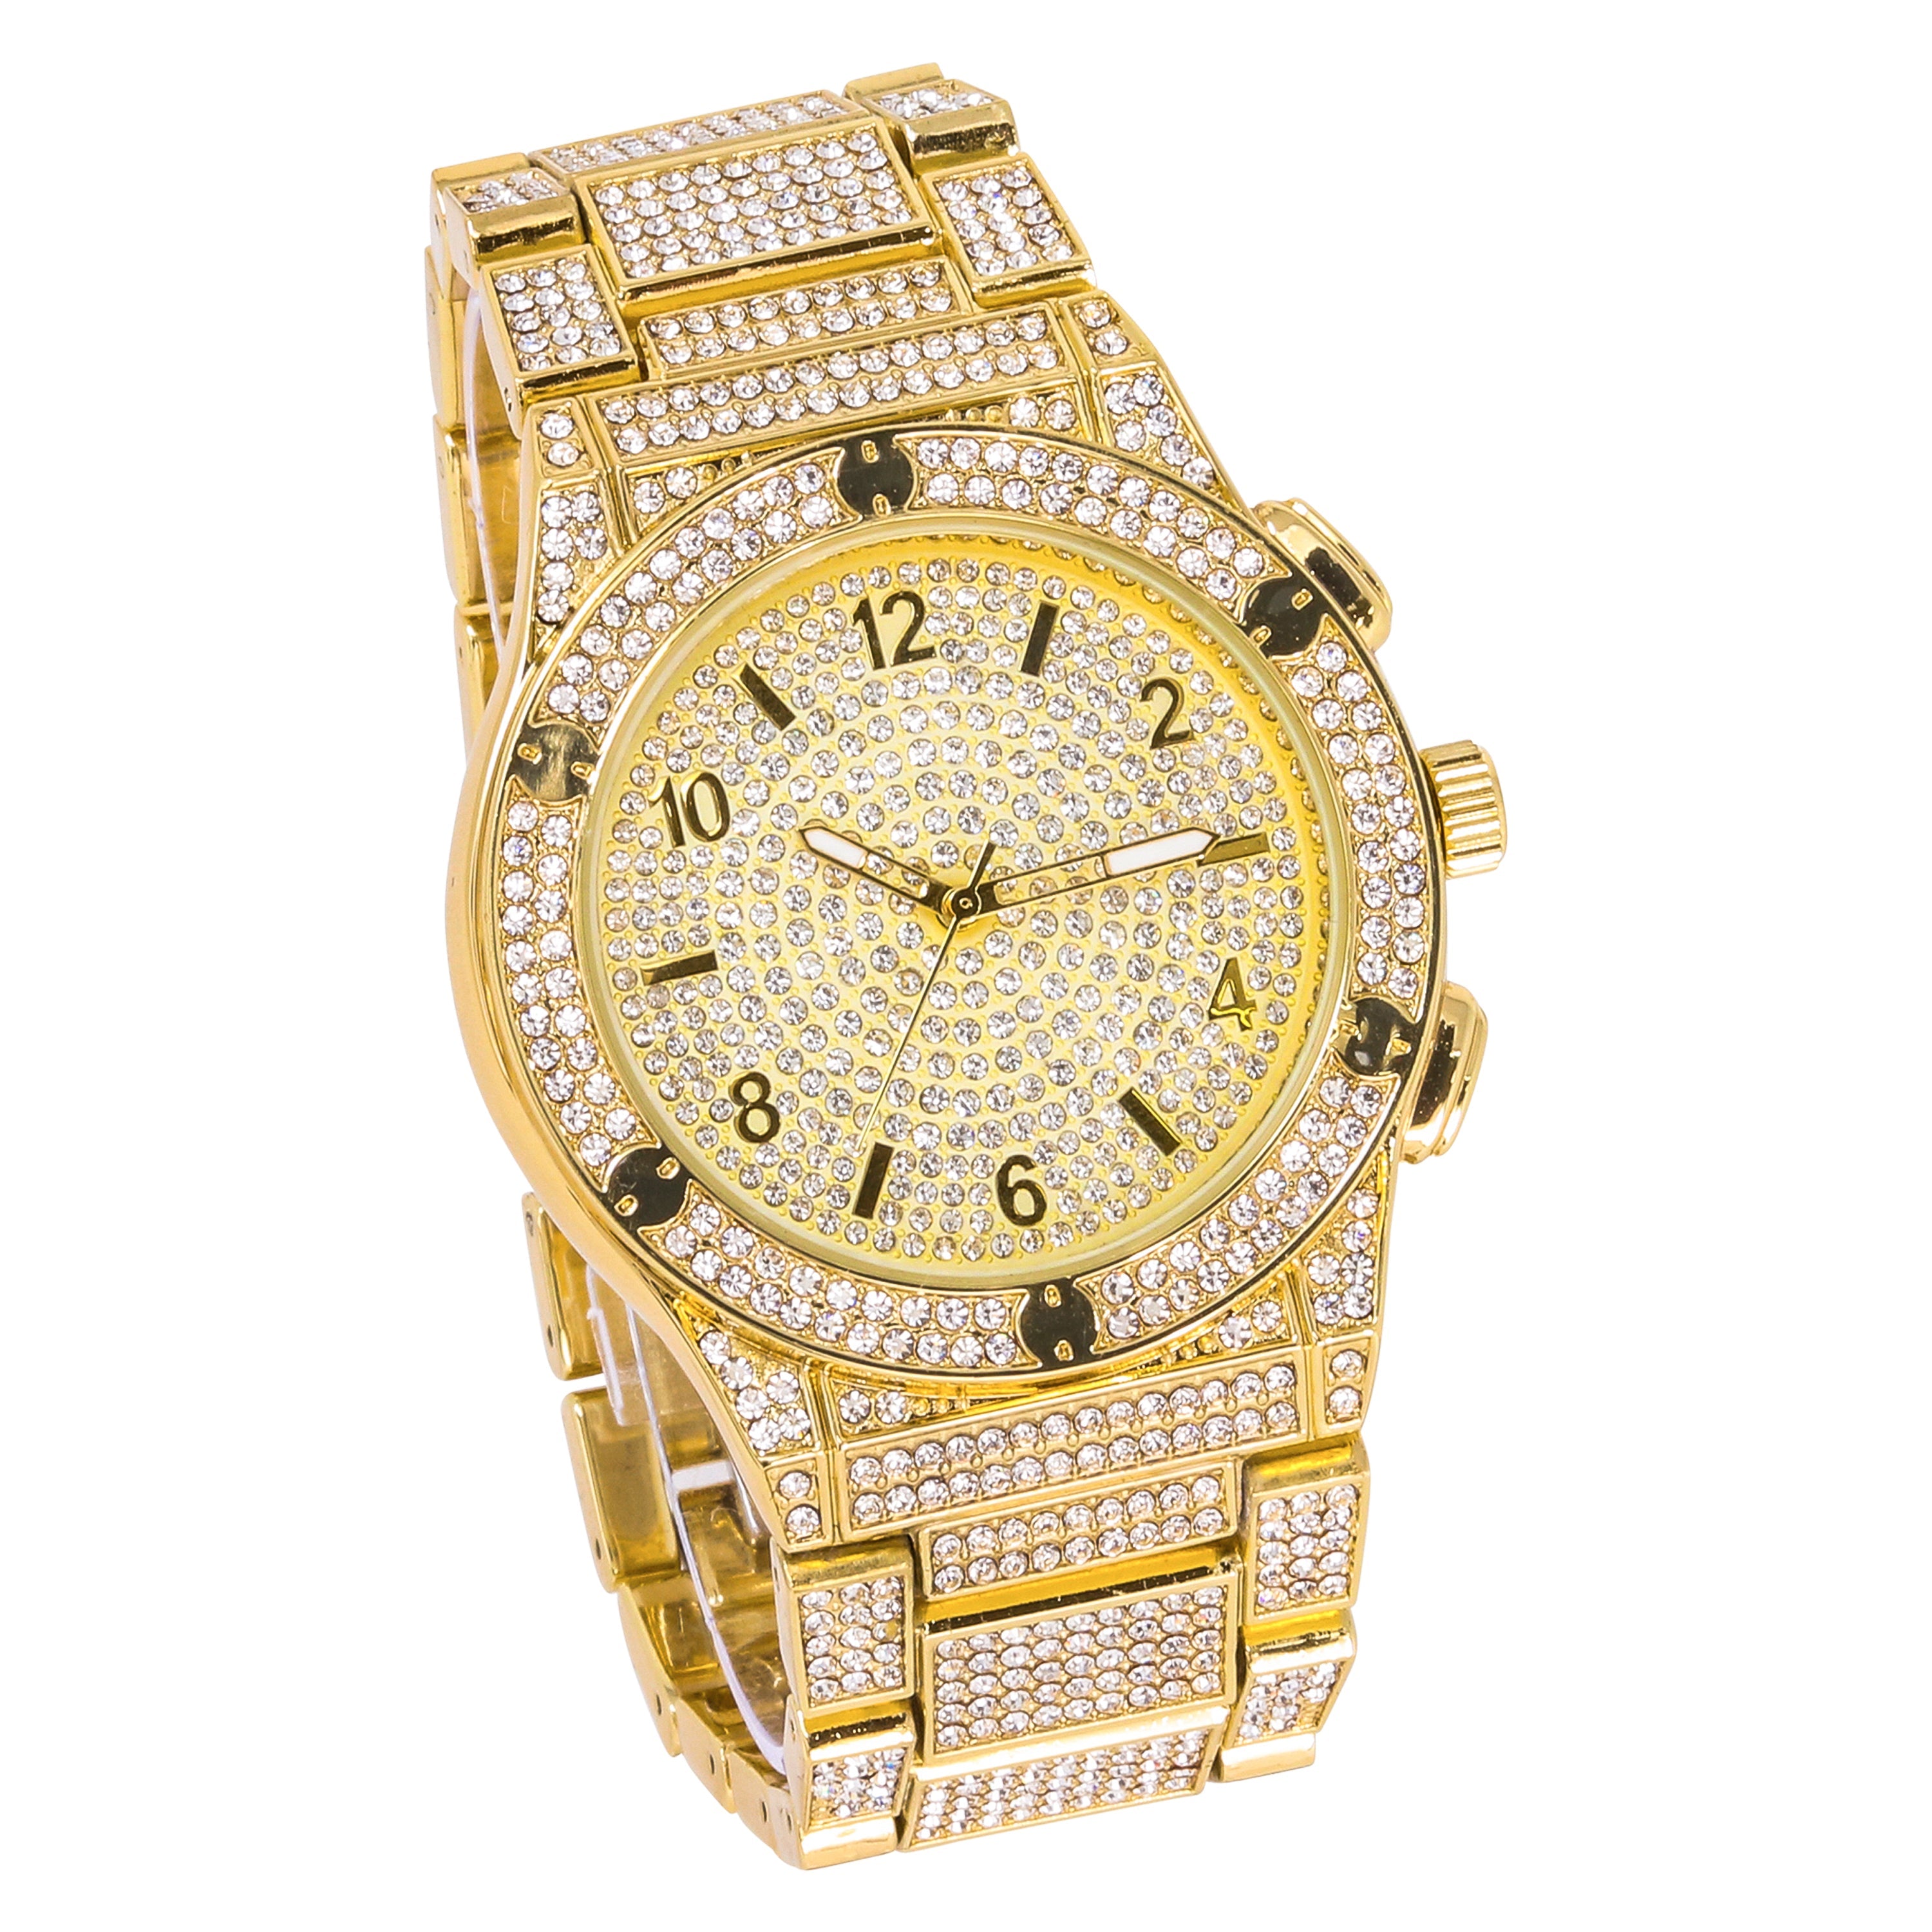 Men's Round Iced Out Watch 42mm Gold - "Fully Iced Band"